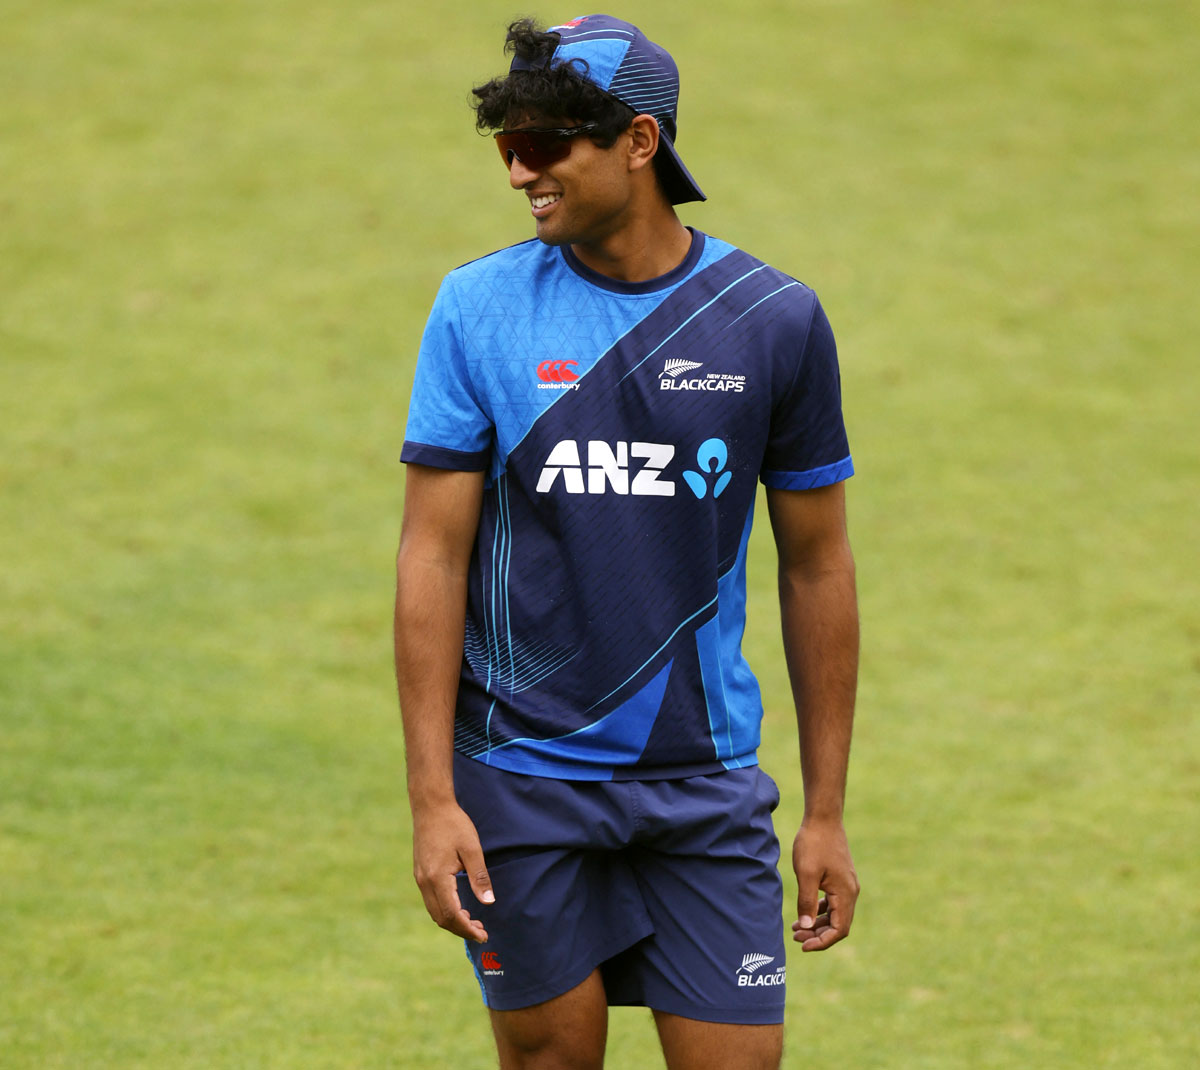 The 24-year-old Rachin Ravindra returns to the Test fold after two years on the sidelines